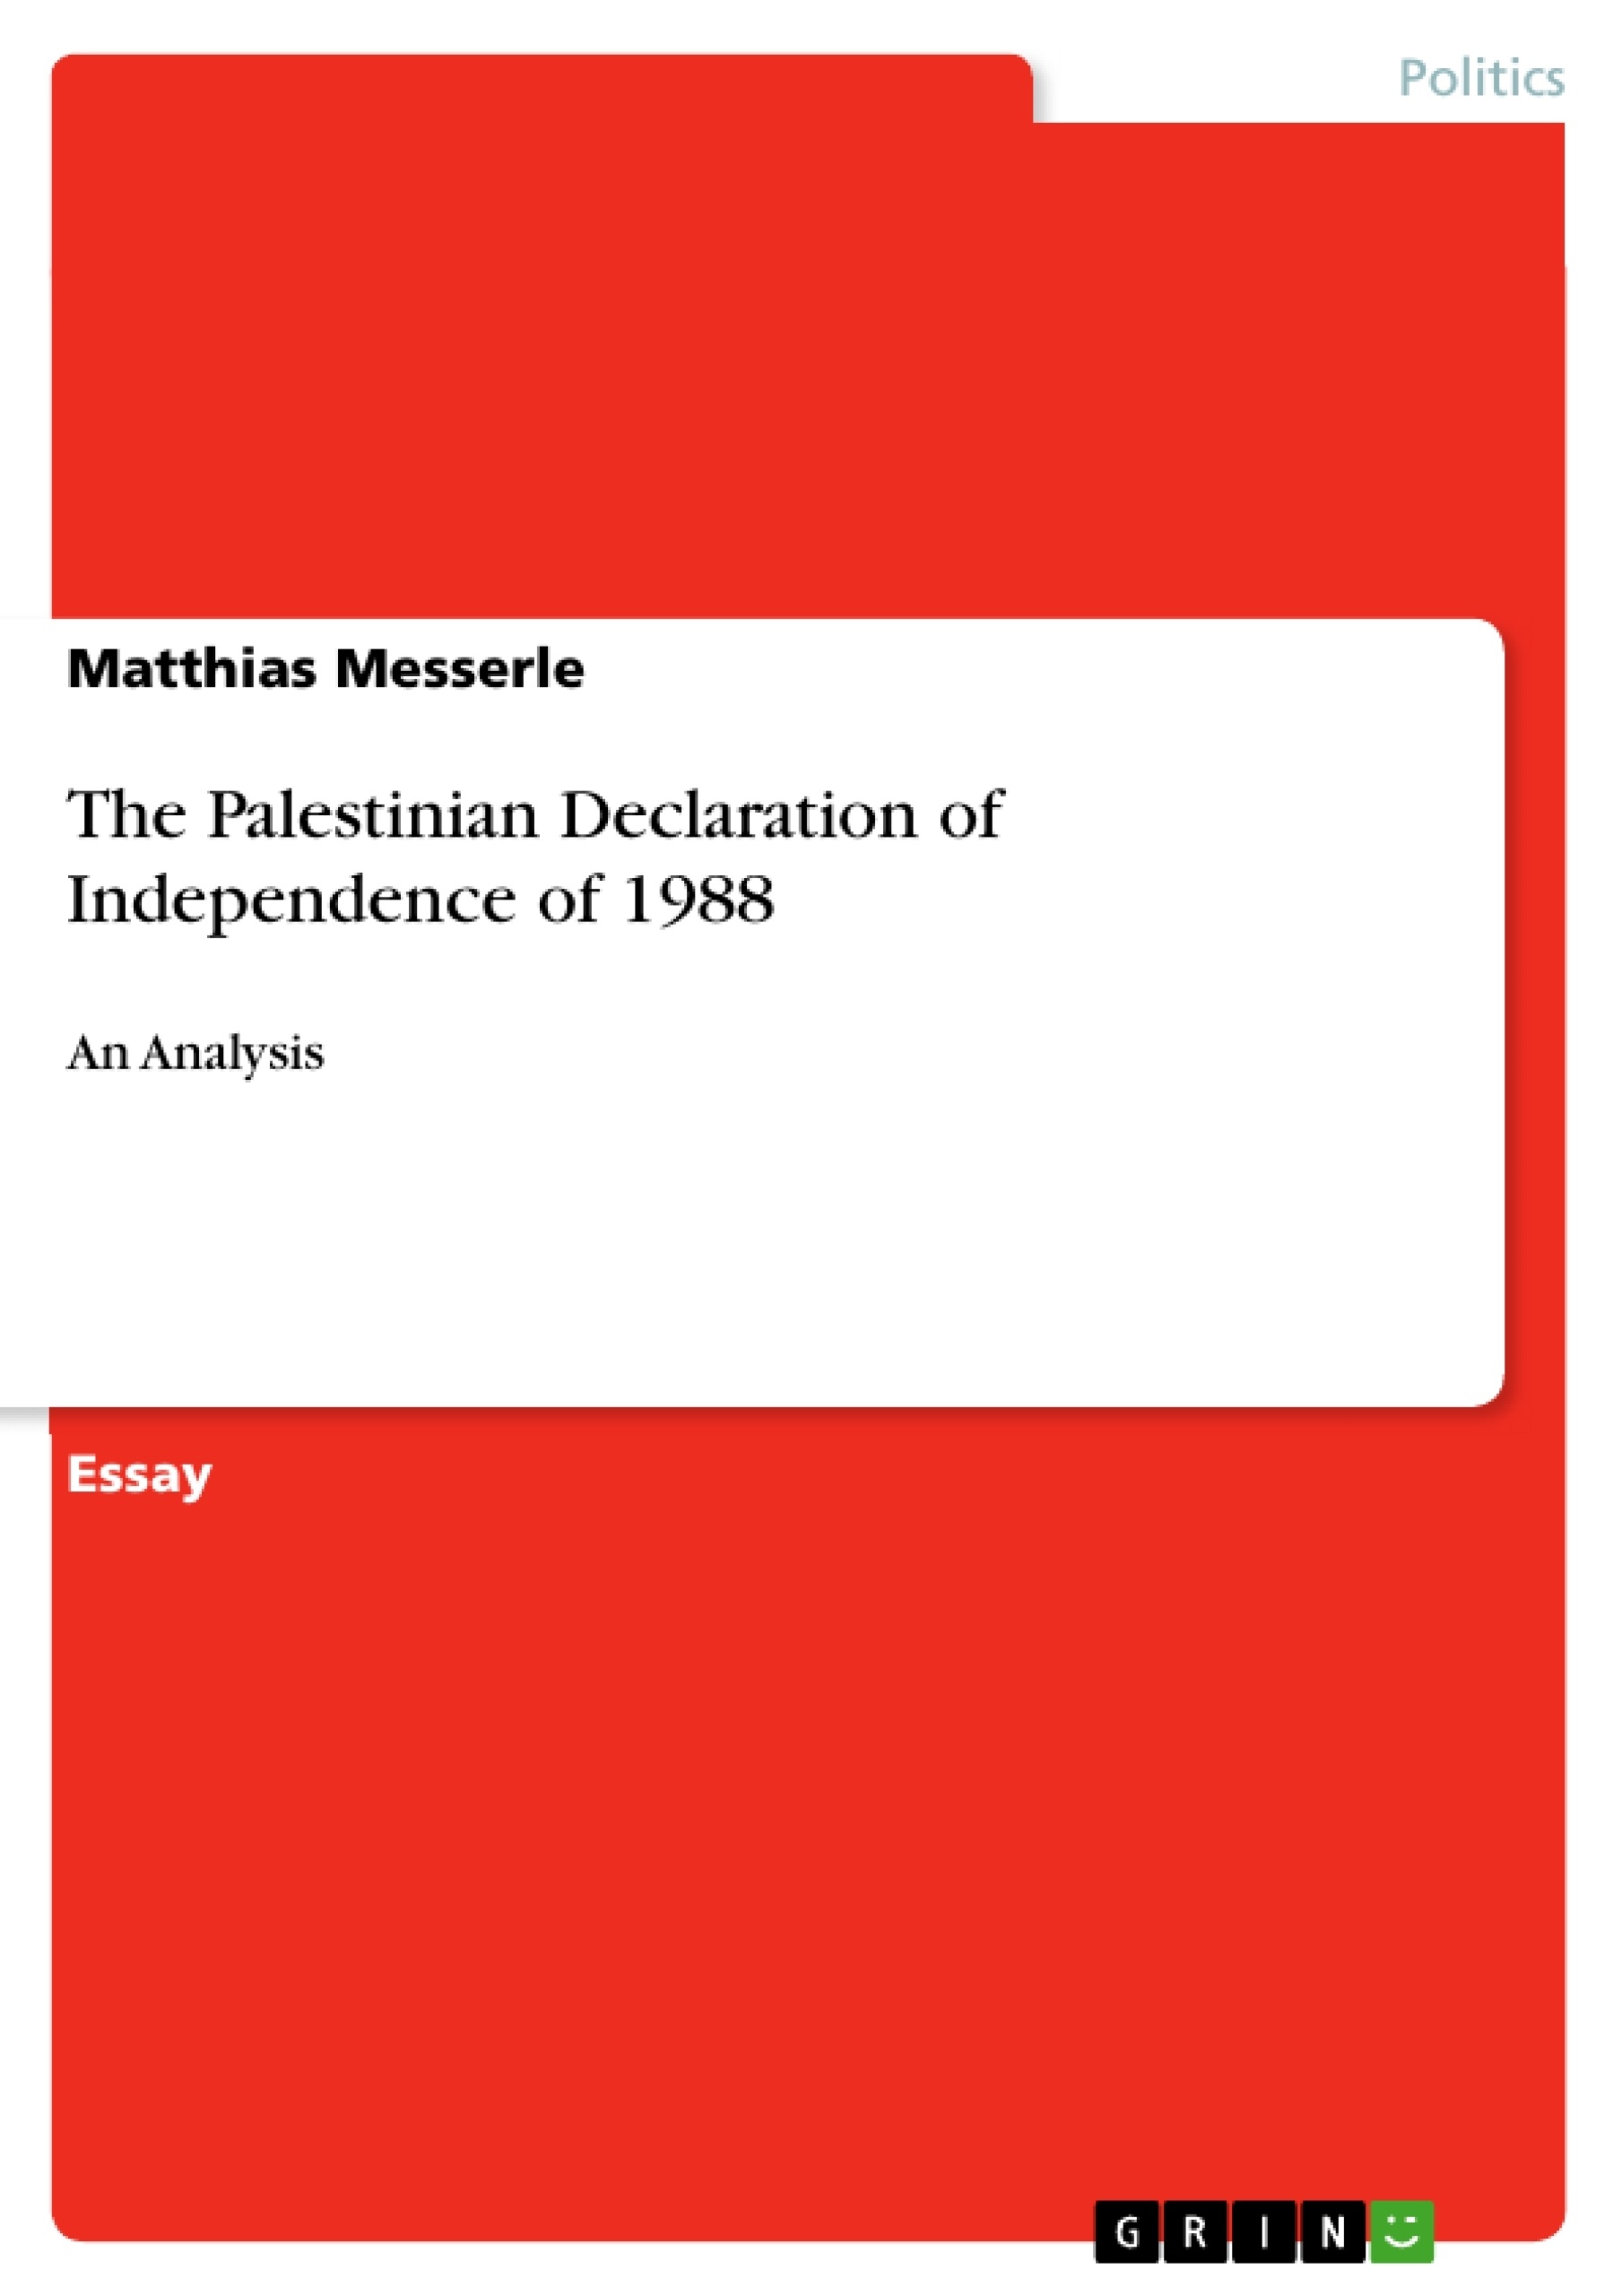 Title: The Palestinian Declaration of Independence of 1988